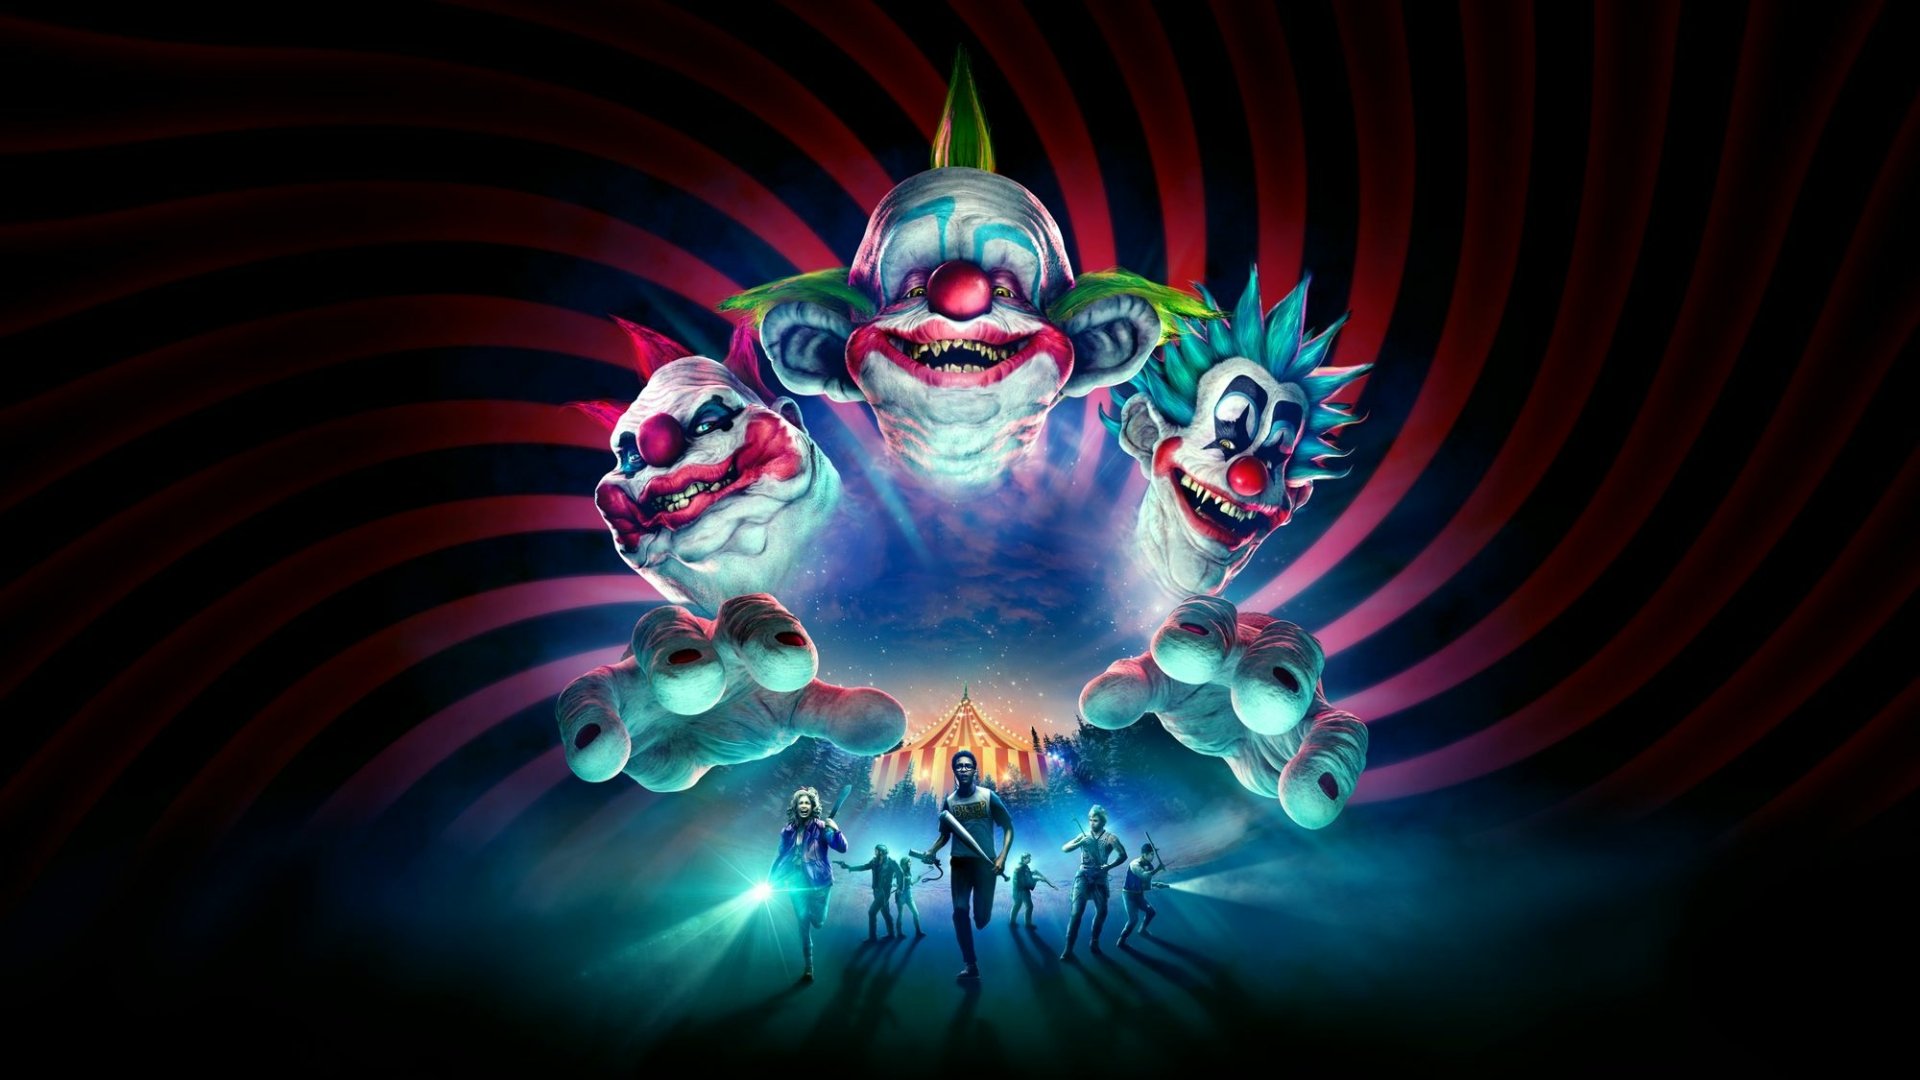 Killer Clowns From Outer Space: The Game